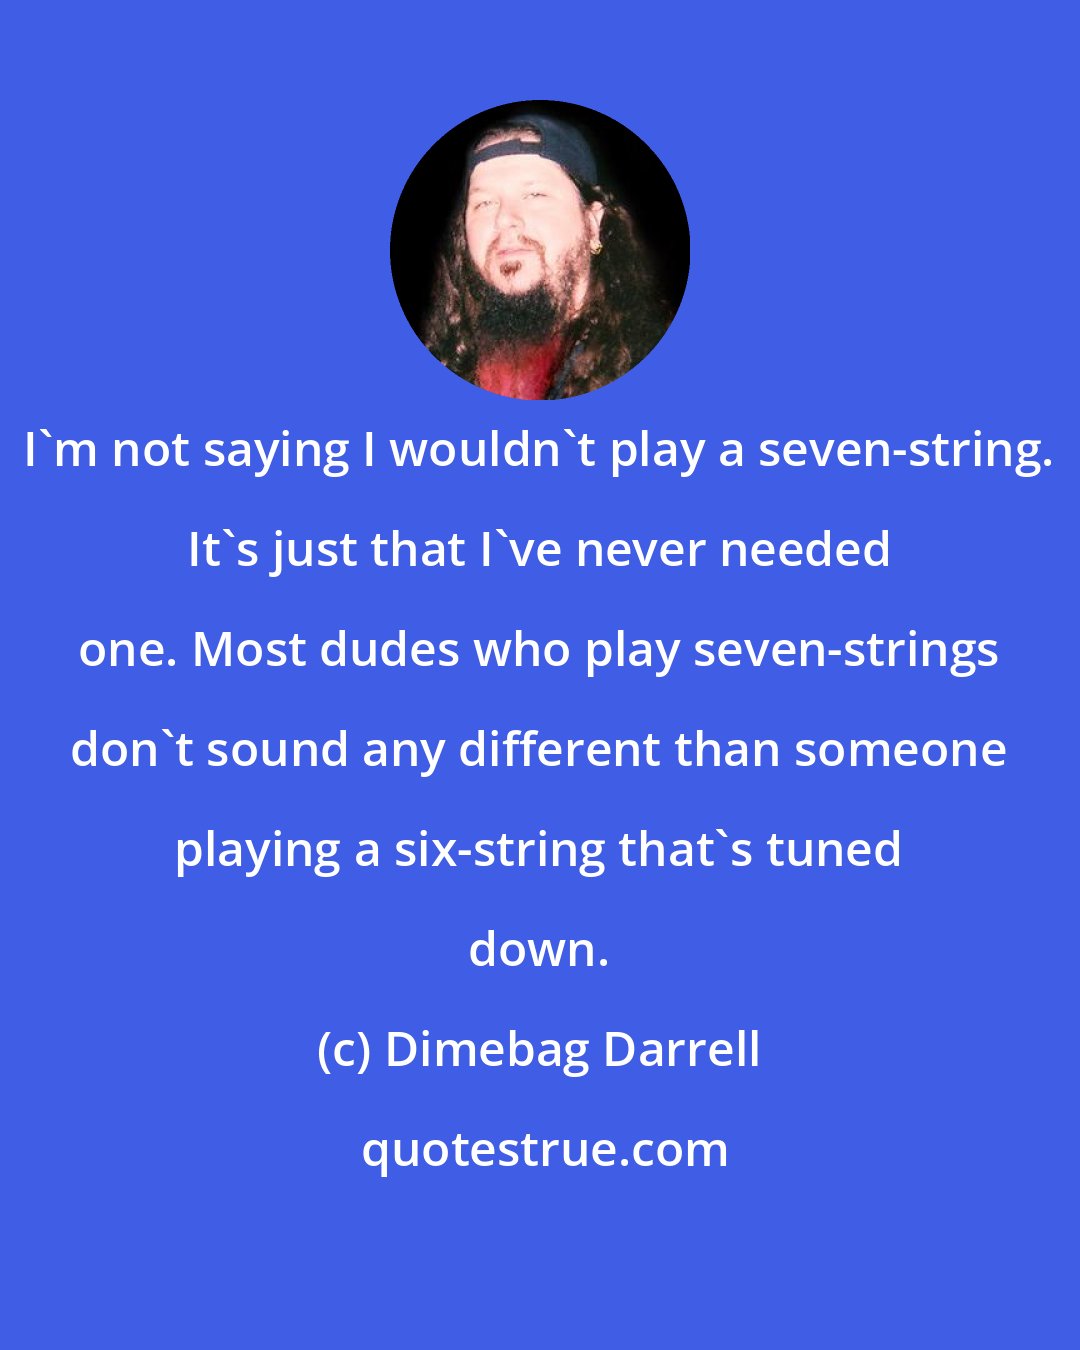 Dimebag Darrell: I'm not saying I wouldn't play a seven-string. It's just that I've never needed one. Most dudes who play seven-strings don't sound any different than someone playing a six-string that's tuned down.